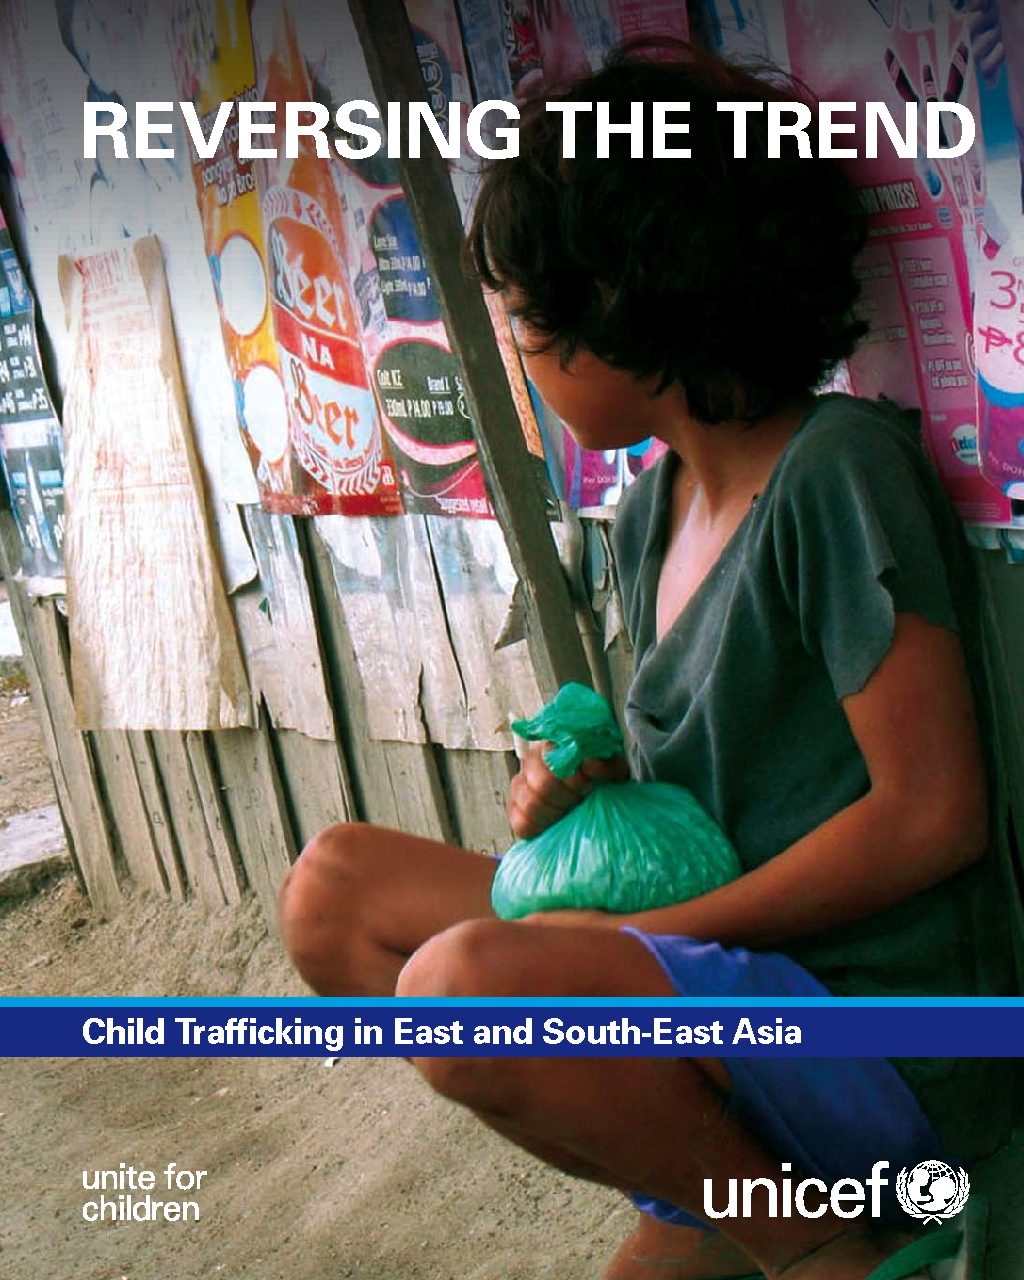 Child Trafficking in East and South-East Asia: Reversing the Trend